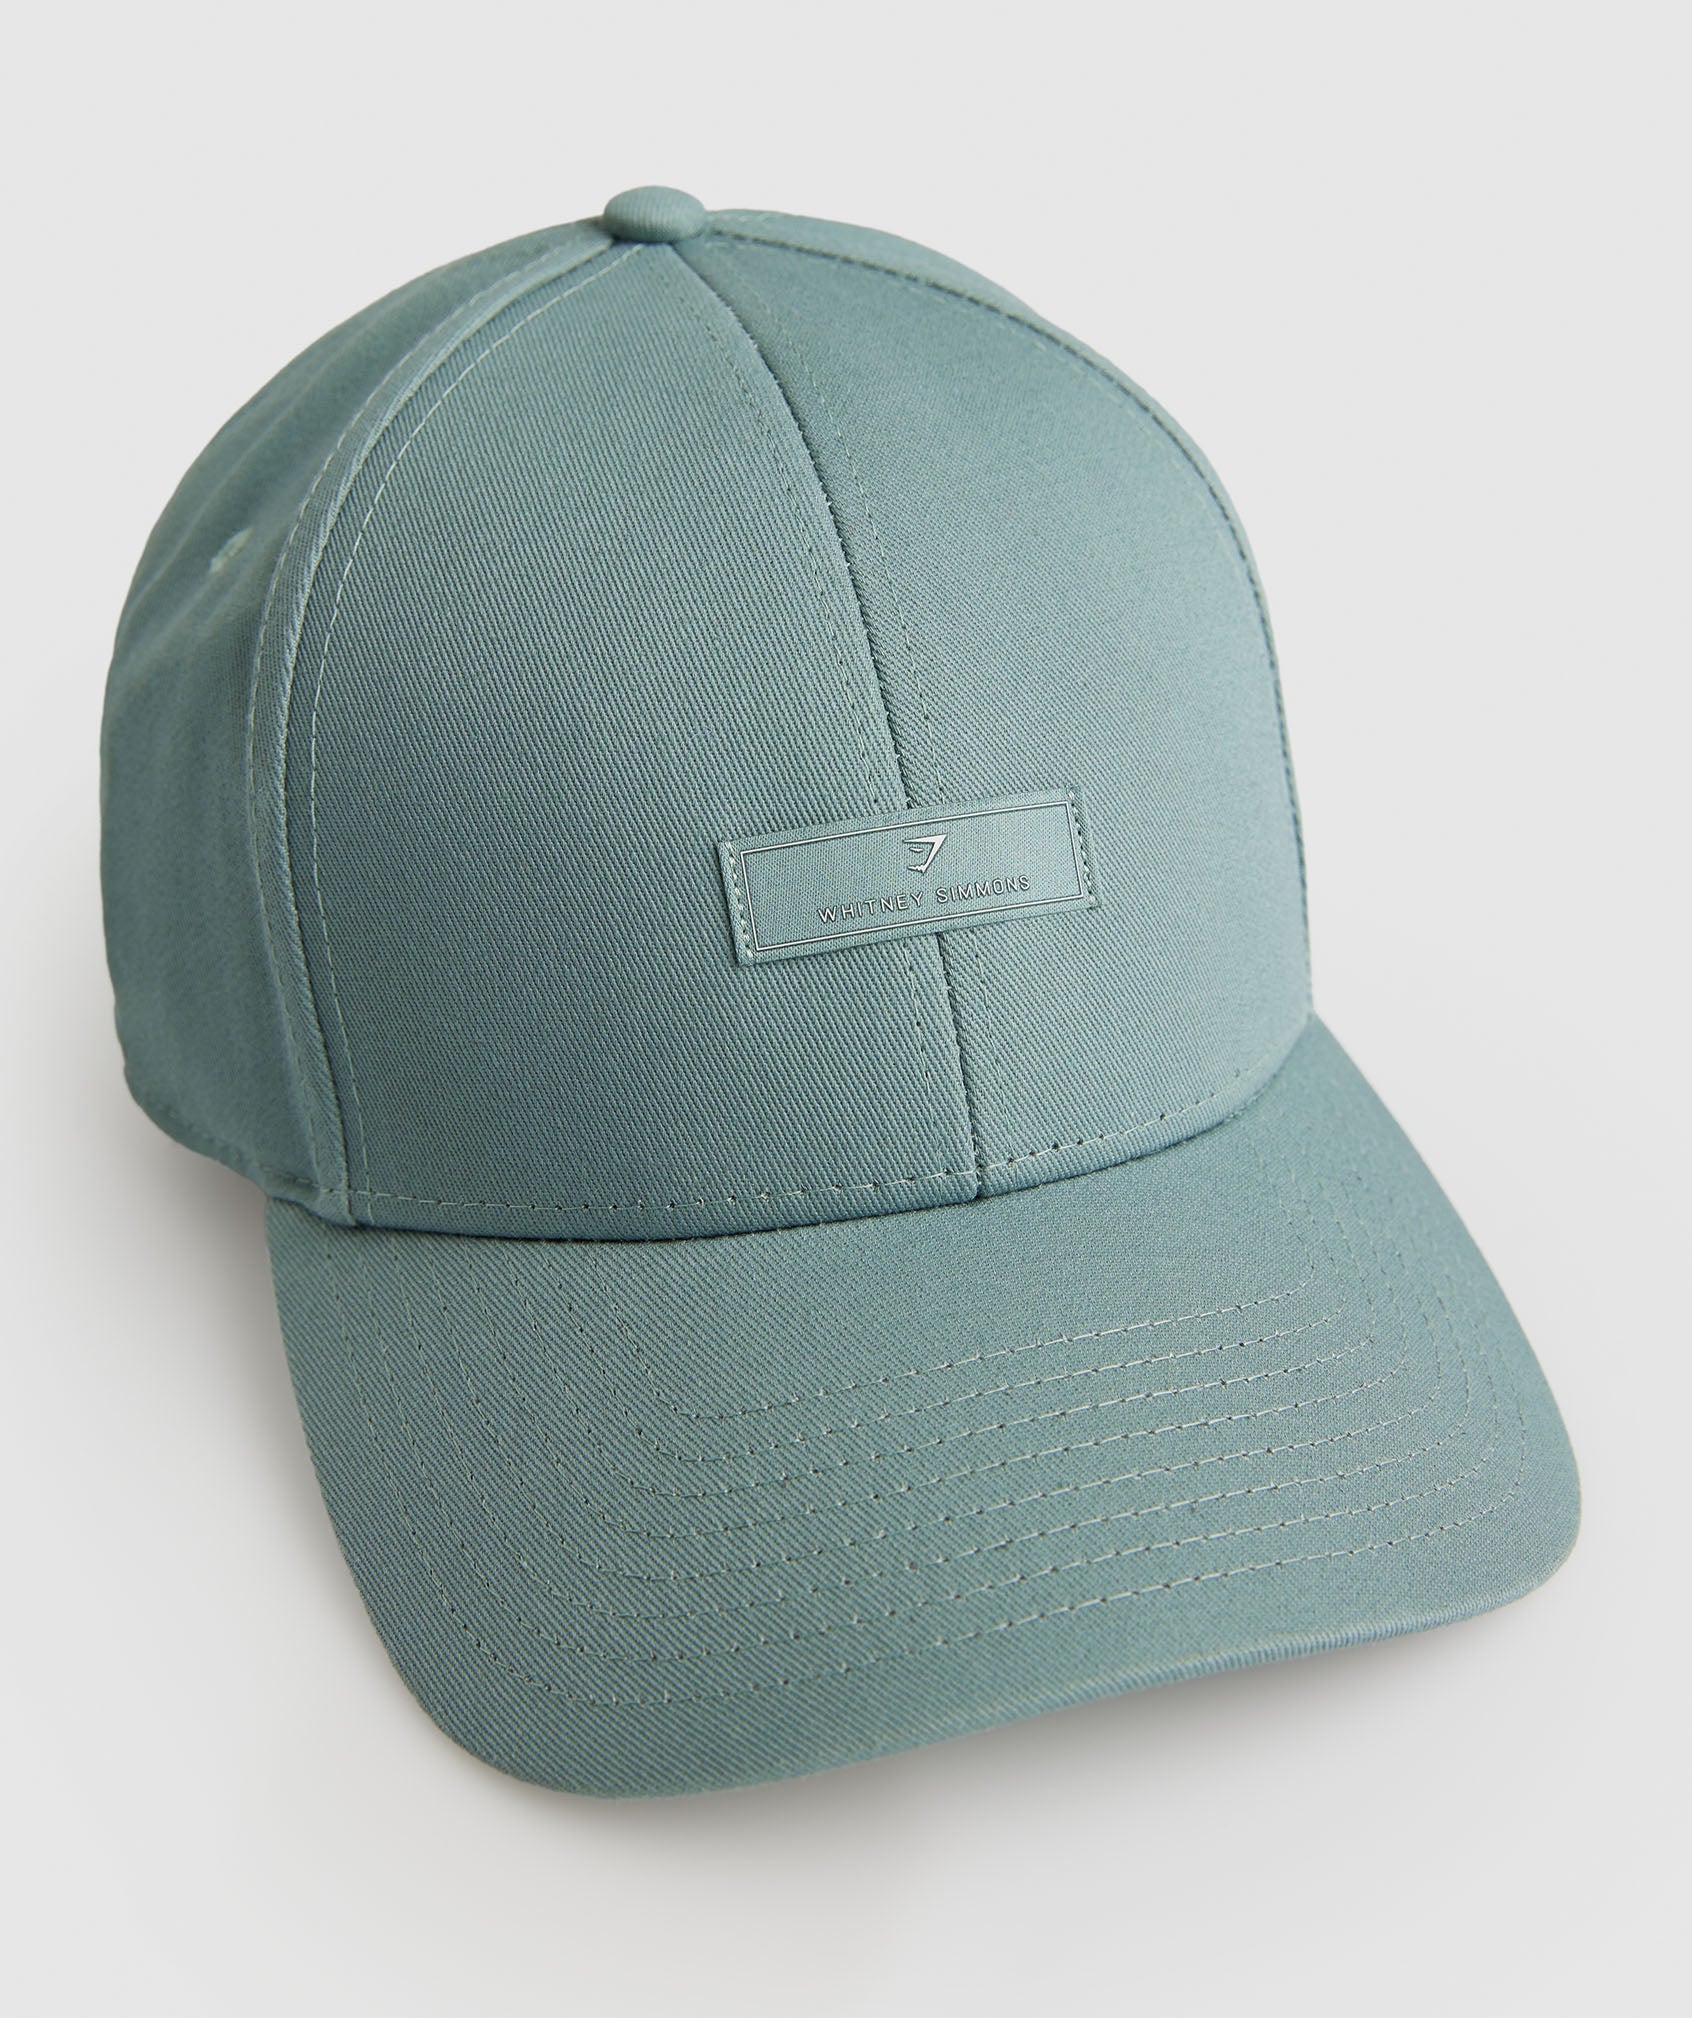 Whitney Cap in Leaf Green - view 4